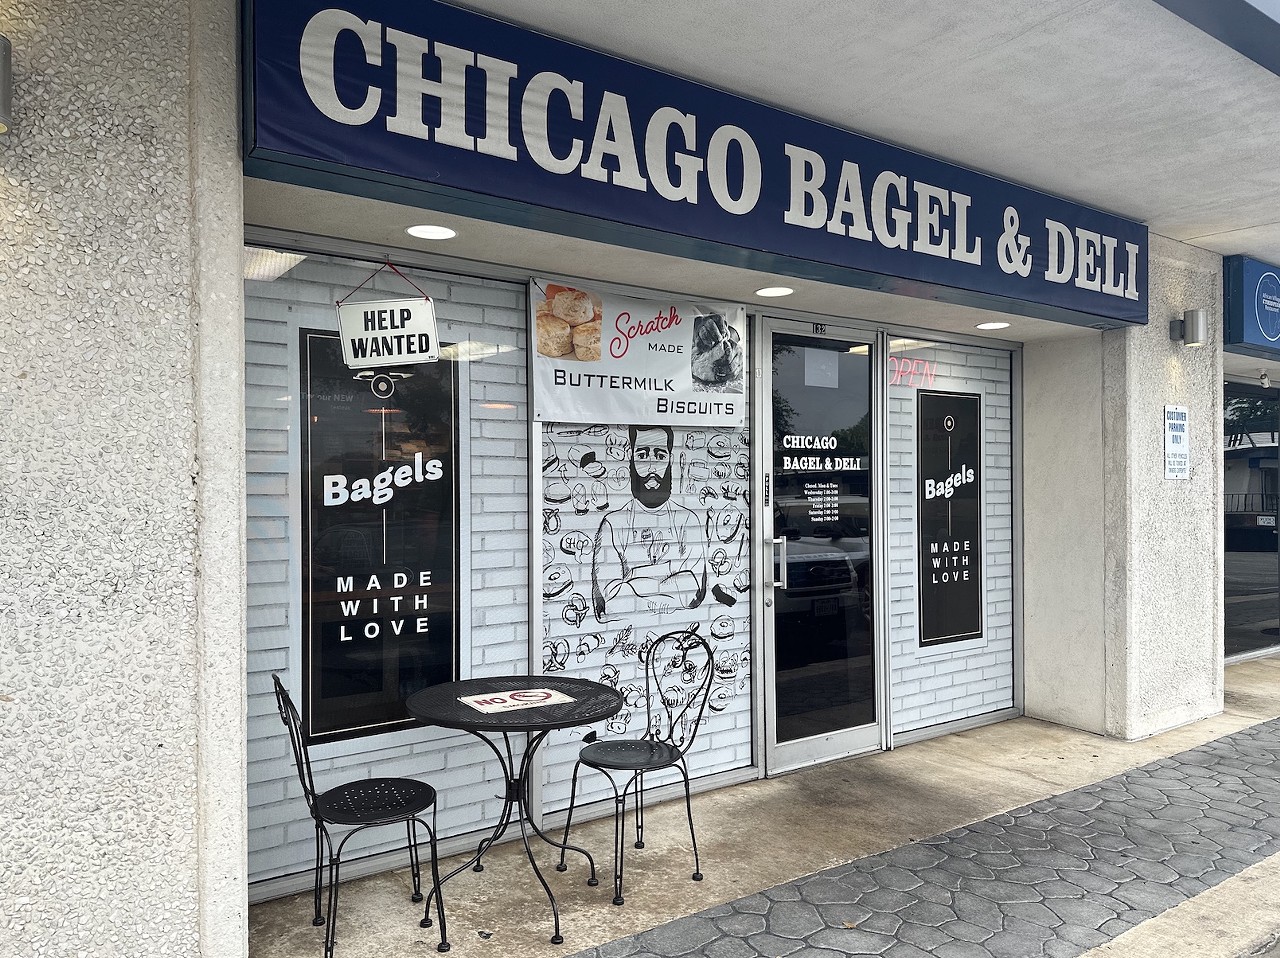 Chicago Bagel & Deli
10918 Wurzbach Road #132, (210) 691-2245, chicagobagelanddeli.com
A variety of bagels are available daily, including garlic, onion, poppy, pumpernickel, egg, blueberry and plenty more. Toppings include butter, jelly, honey butter or the ever-classic plain cream cheese.